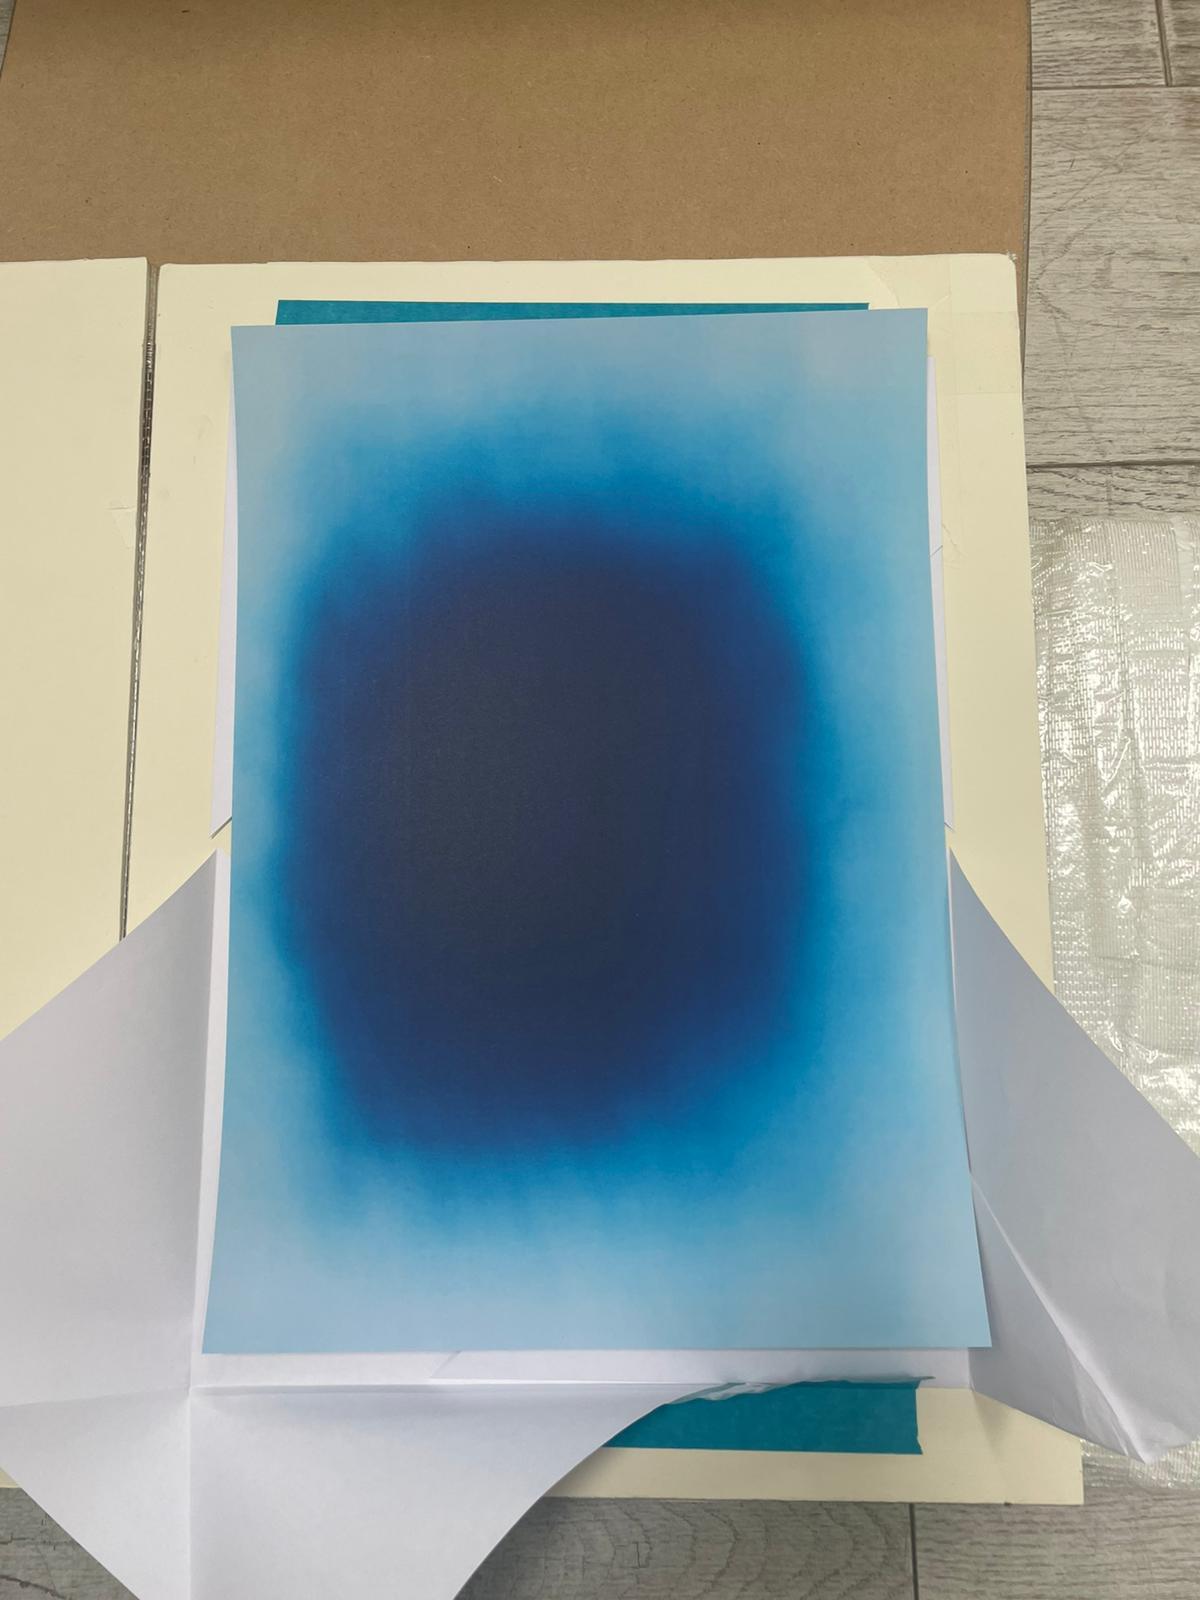 Anish Kapoor, Breathing Blue, 2020

Digital print on 350gsm paper
From a limited edition of 100. Printed title and name of the artist on the reverse.
Published by the Hospital Rooms, London.
Hand numbered (verso) - edition 40/100 (as shown in